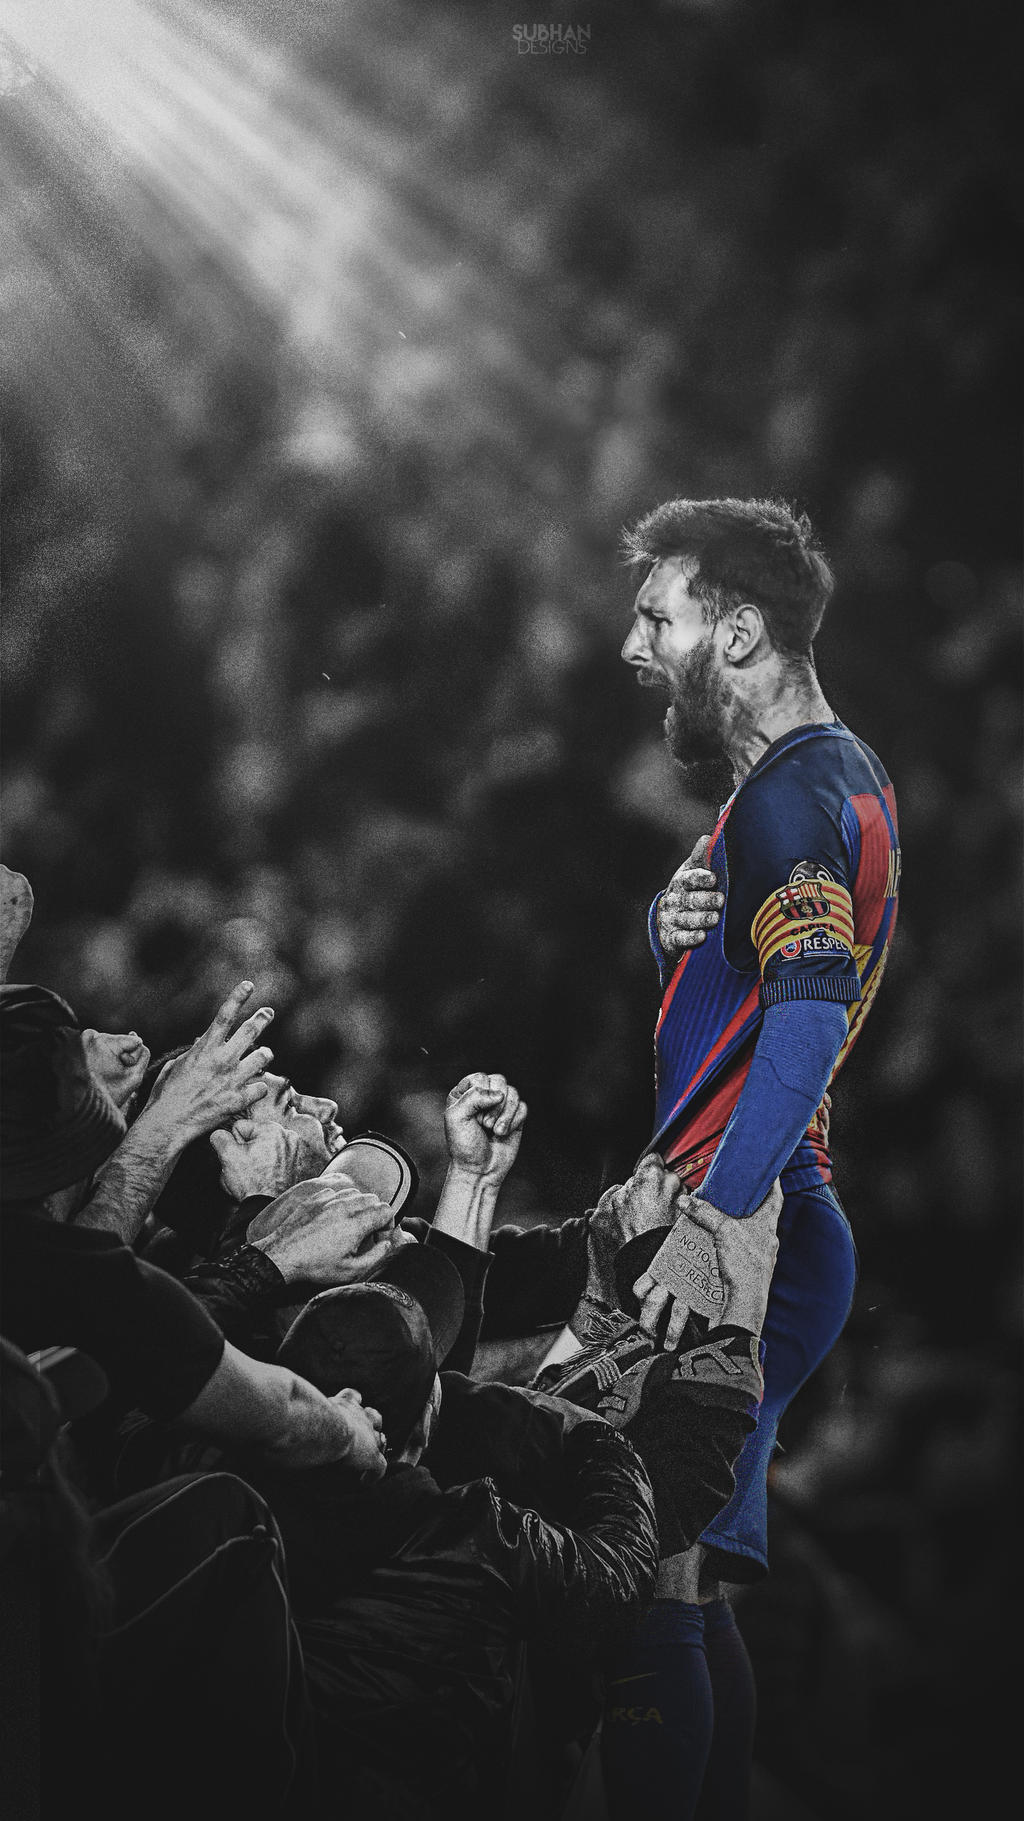 Messi Mobile wallpaper 2017 by subhan22 on DeviantArt